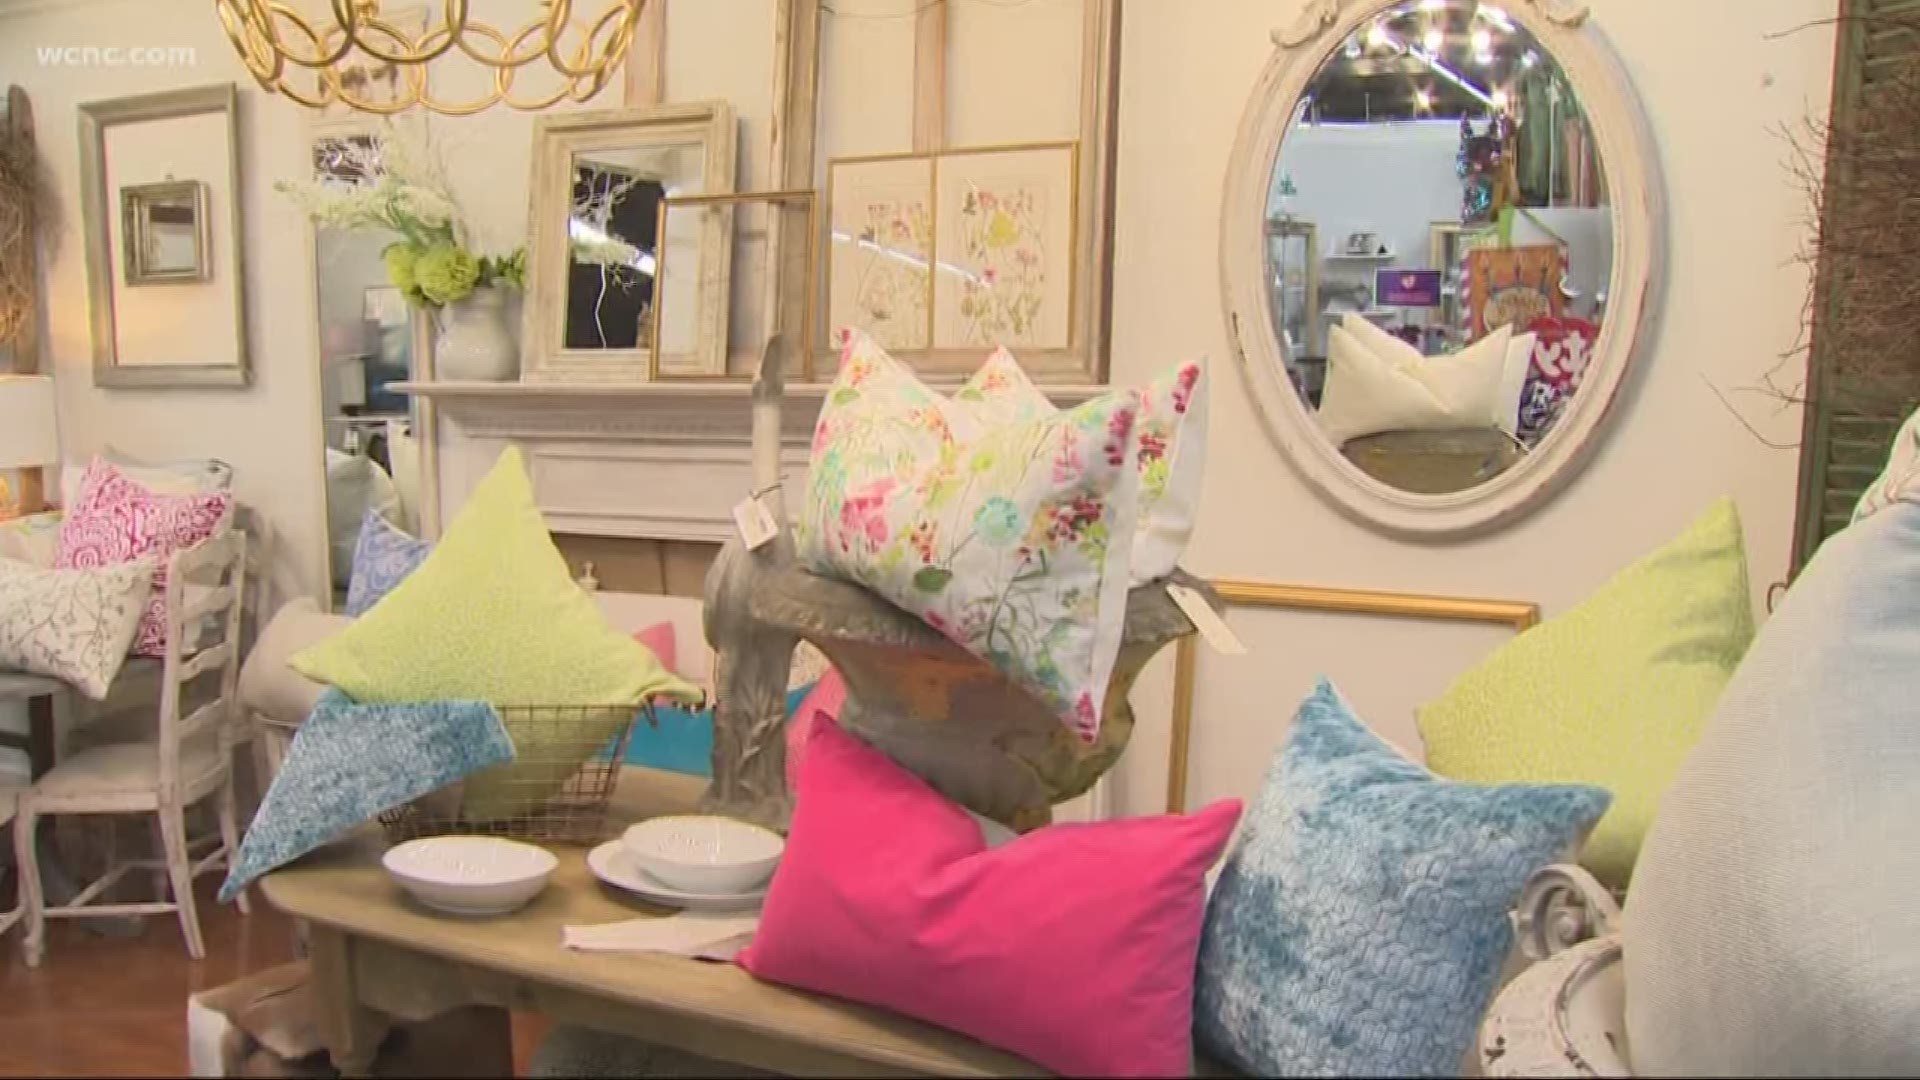 Nita Emory with BLACKLION shows us how to transform a living space with pieces that add a pop of color.